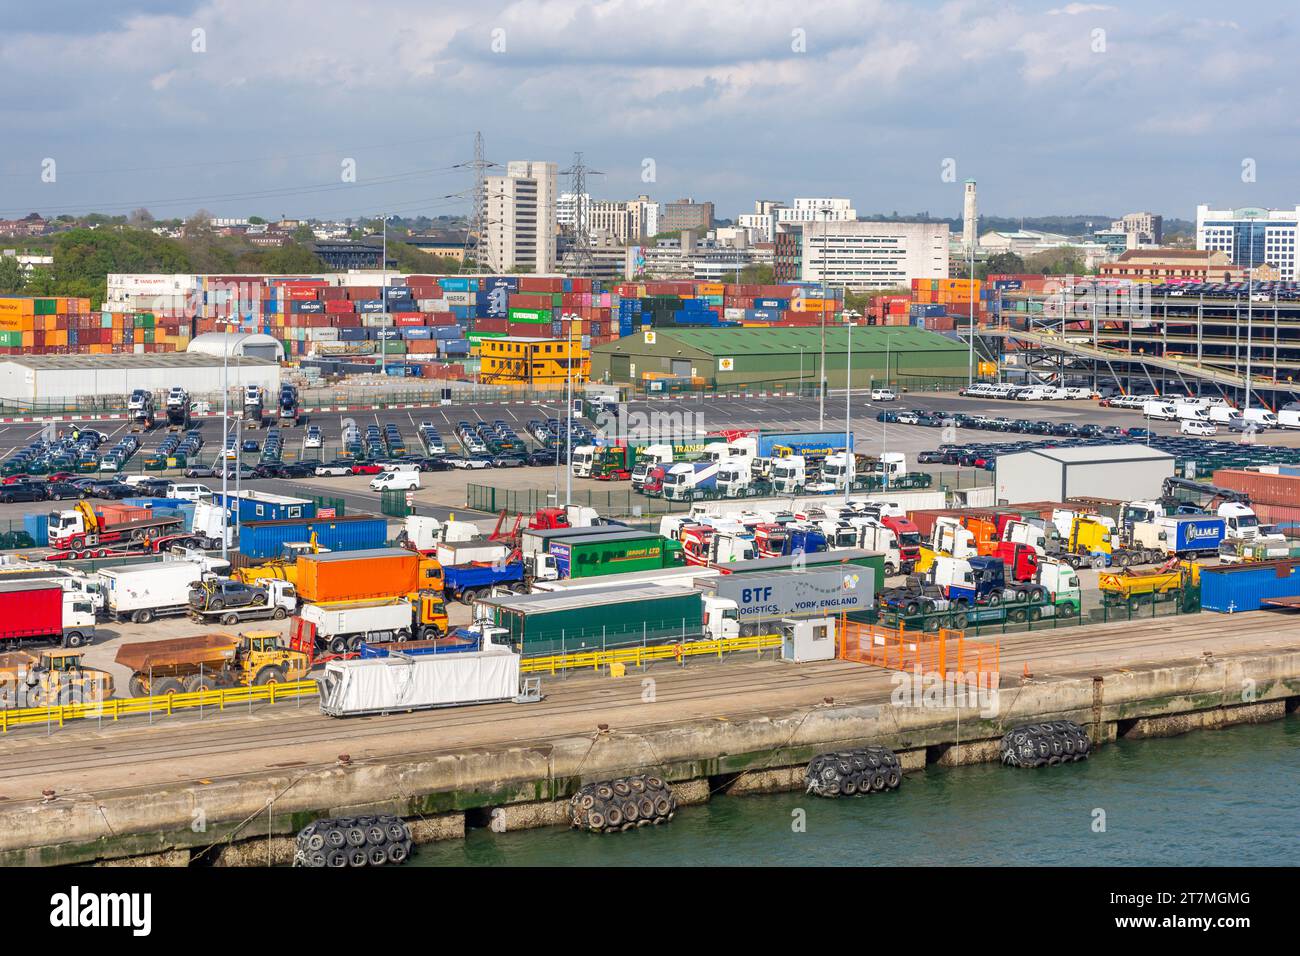 Containers stacked and vehicles parked at Port of Southampton, Southampton, Hampshire, England, United Kingdom Stock Photo